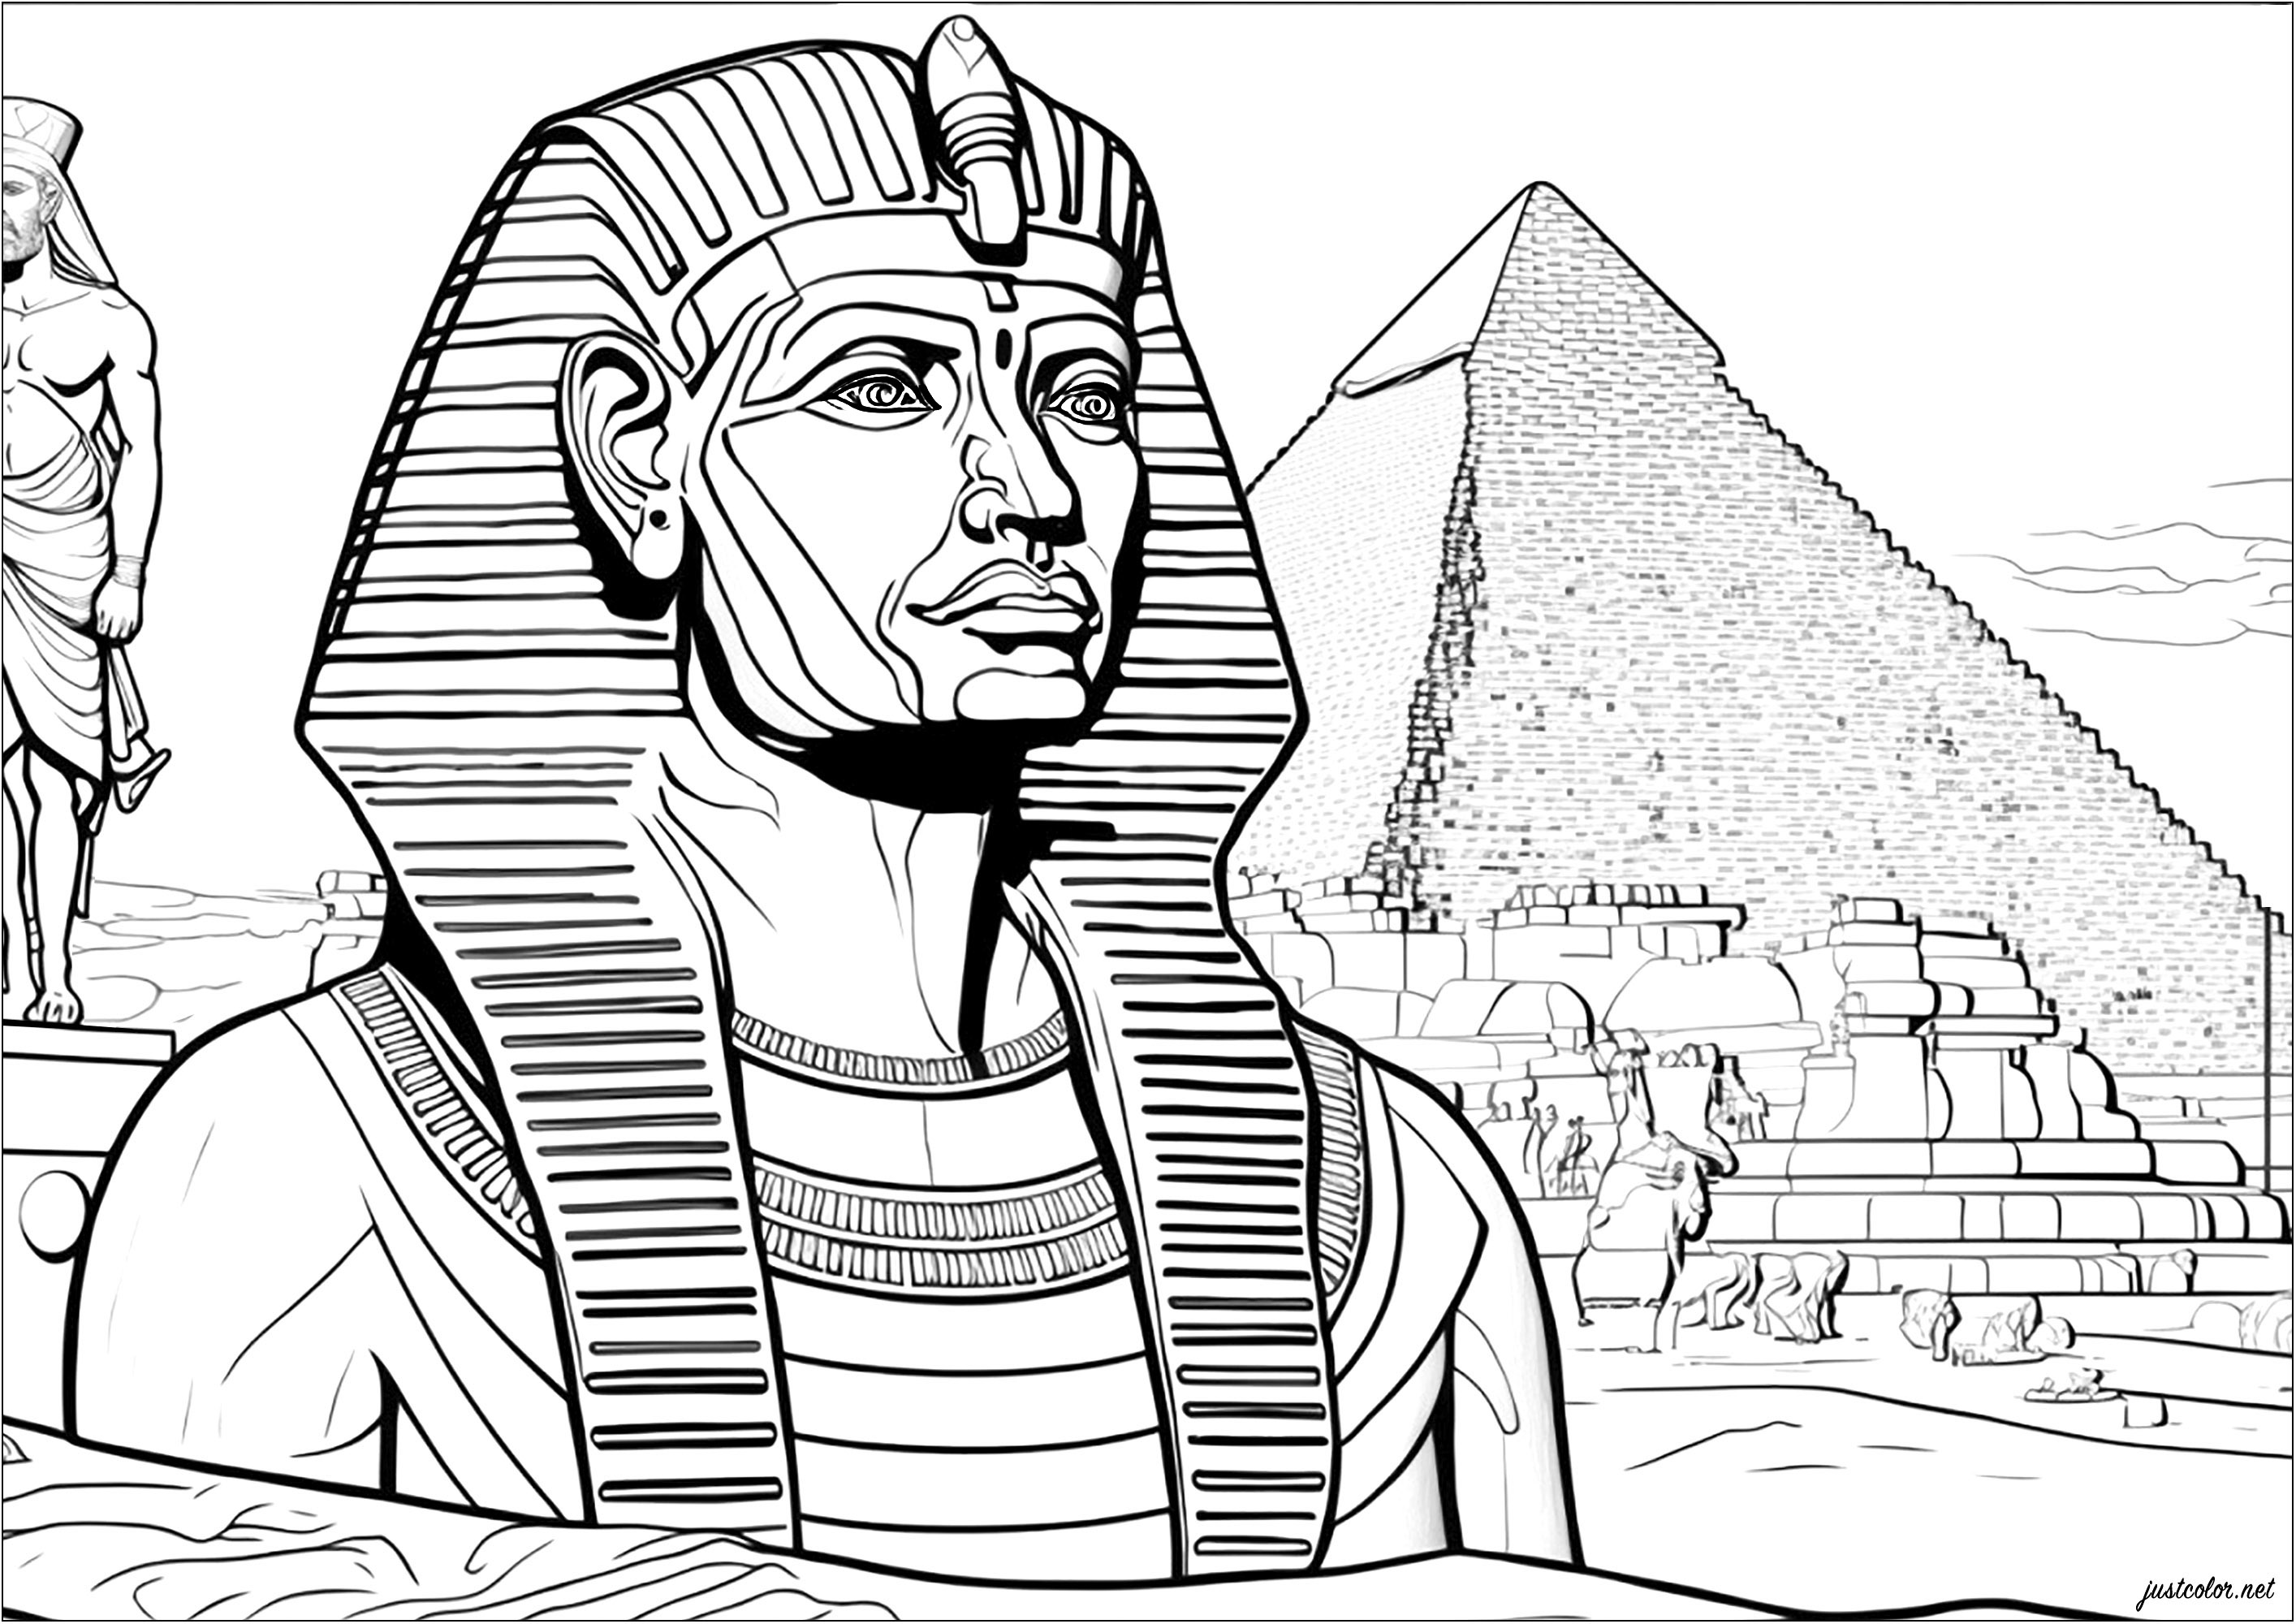 Majestic Pharaoh in front of a pyramid. This coloring page is an invitation to discover ancient Egypt and to imagine yourself in the place of the pharaoh.